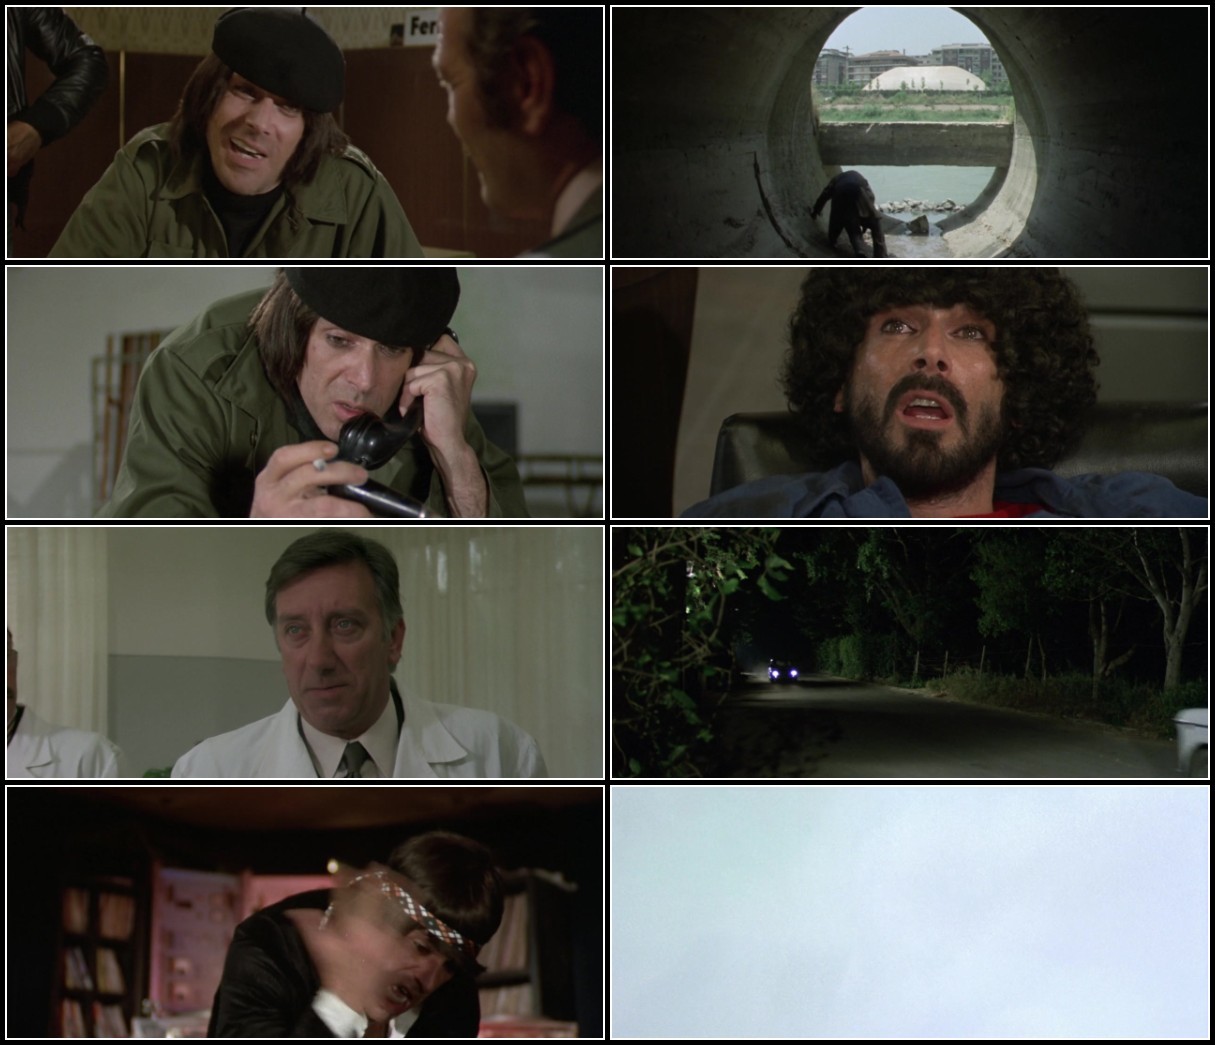 BroThers Till We Die (1978) 720p BluRay [YTS] LqkP40zw_o